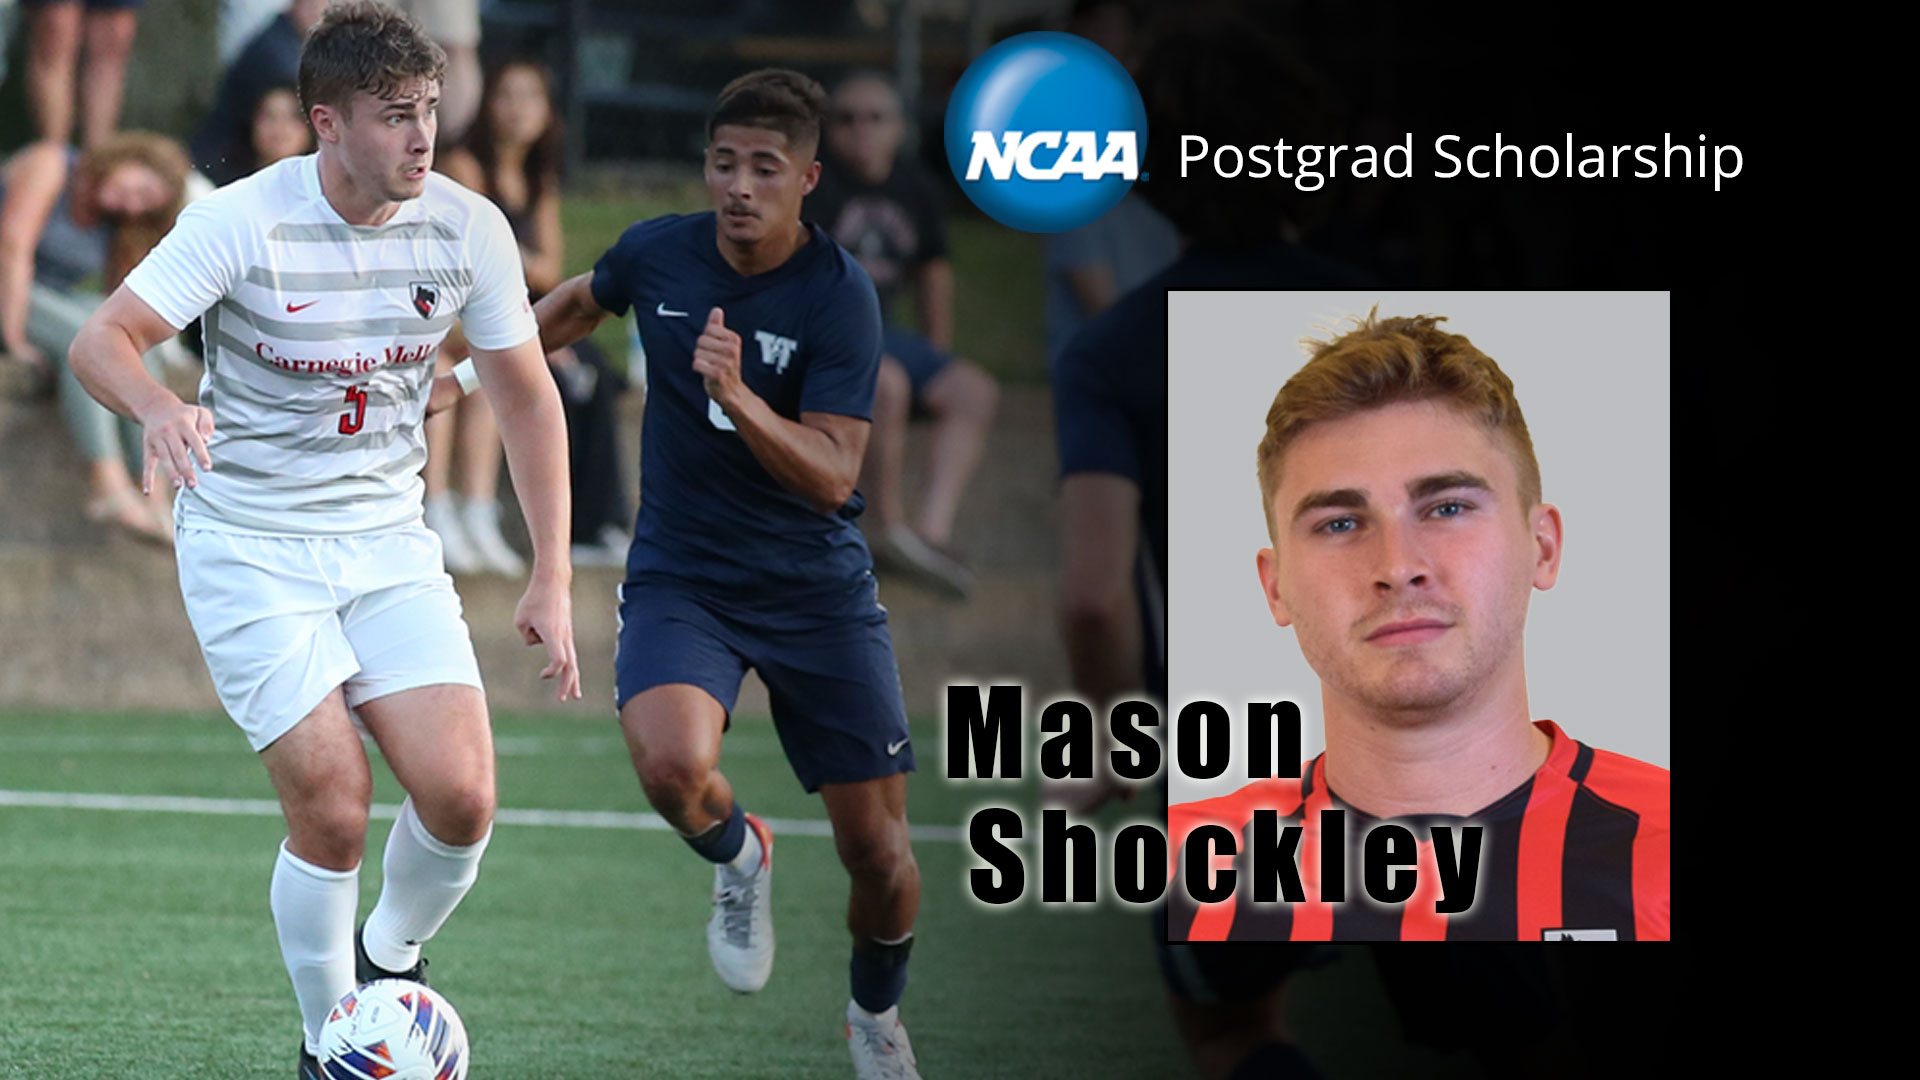 action image of a men's soccer player running with the ball and his portrait image with words Mason Shockley and NCAA Postgrad Scholarship